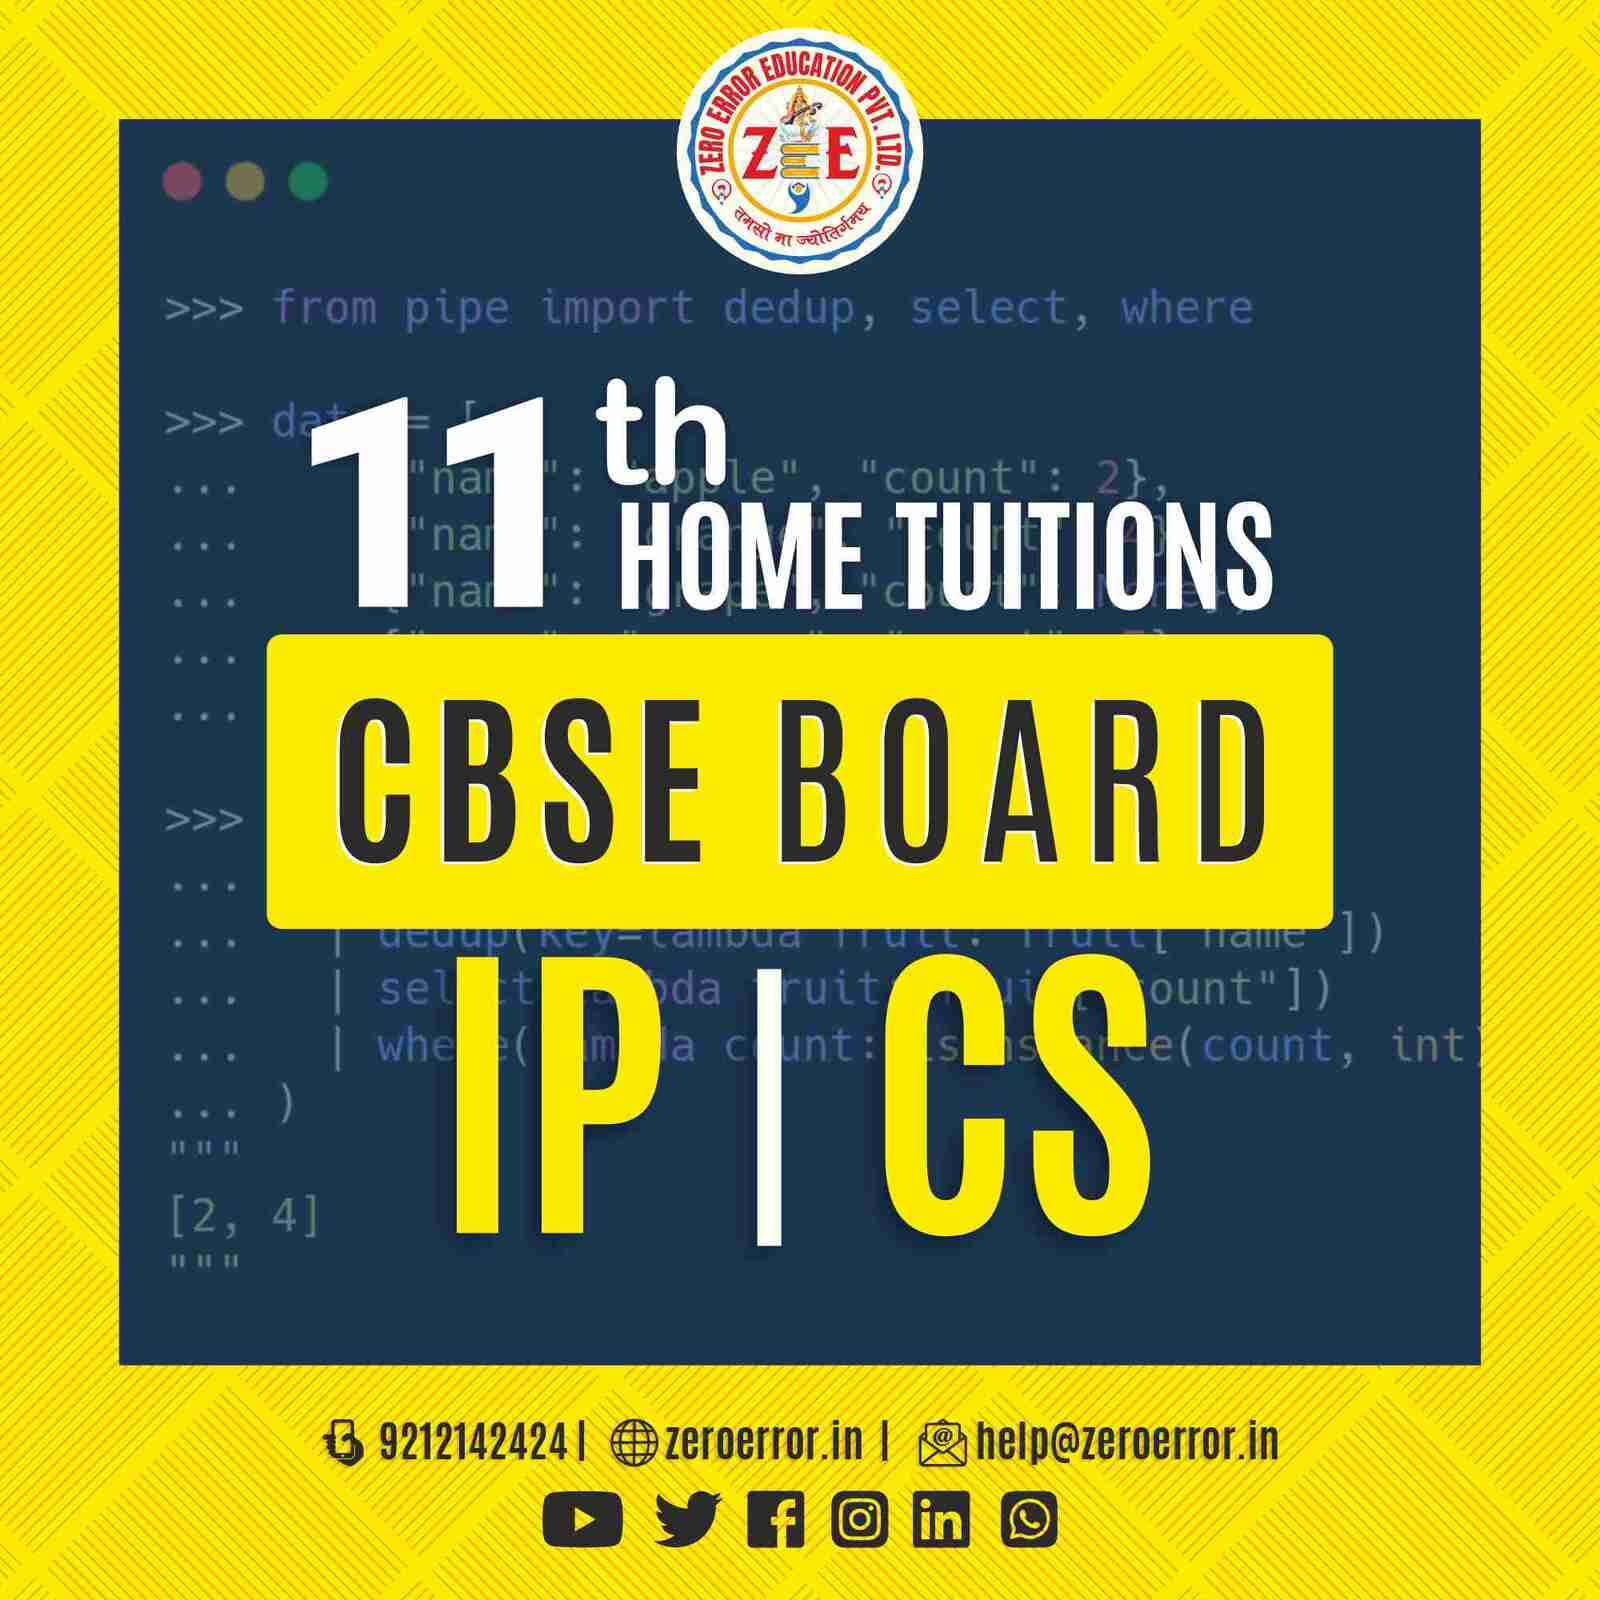 11th Grade CBSE IP | CS Online Classes by Zero Error Education Prepare for your CBSE board exams with online and offline IP | CS classes for 11th grade. Learn from experienced home tutors and get all the help you need to succeed. Enroll today at Zero Error Education. [https://zeroerror.in/] Call 9212142424 for more information.